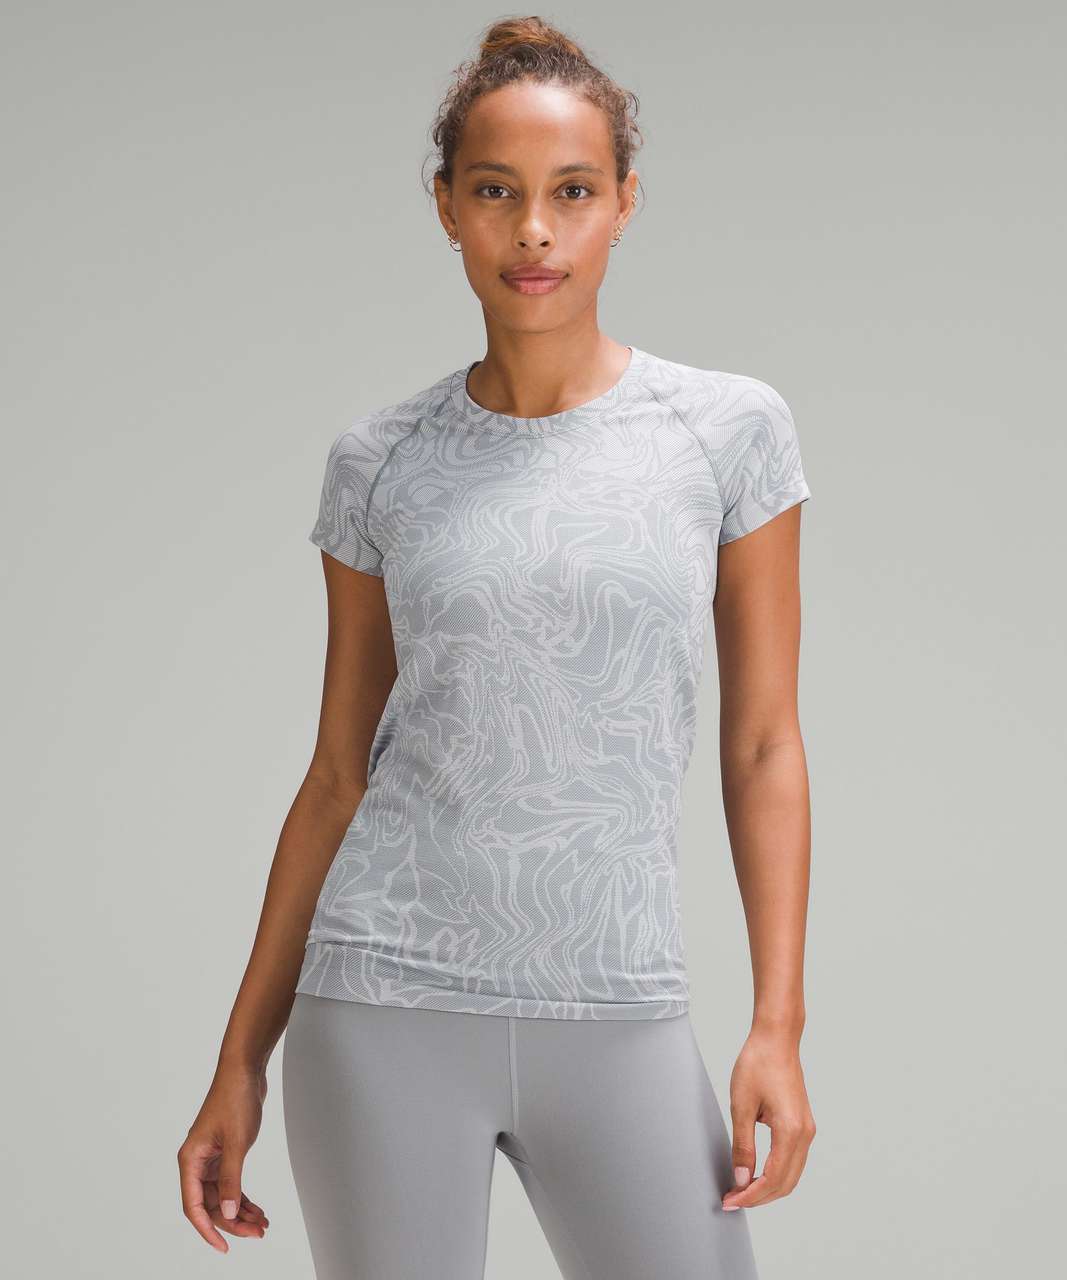 lululemon athletica Swiftly Tech 2.0 Striped Stretch T-shirt in White